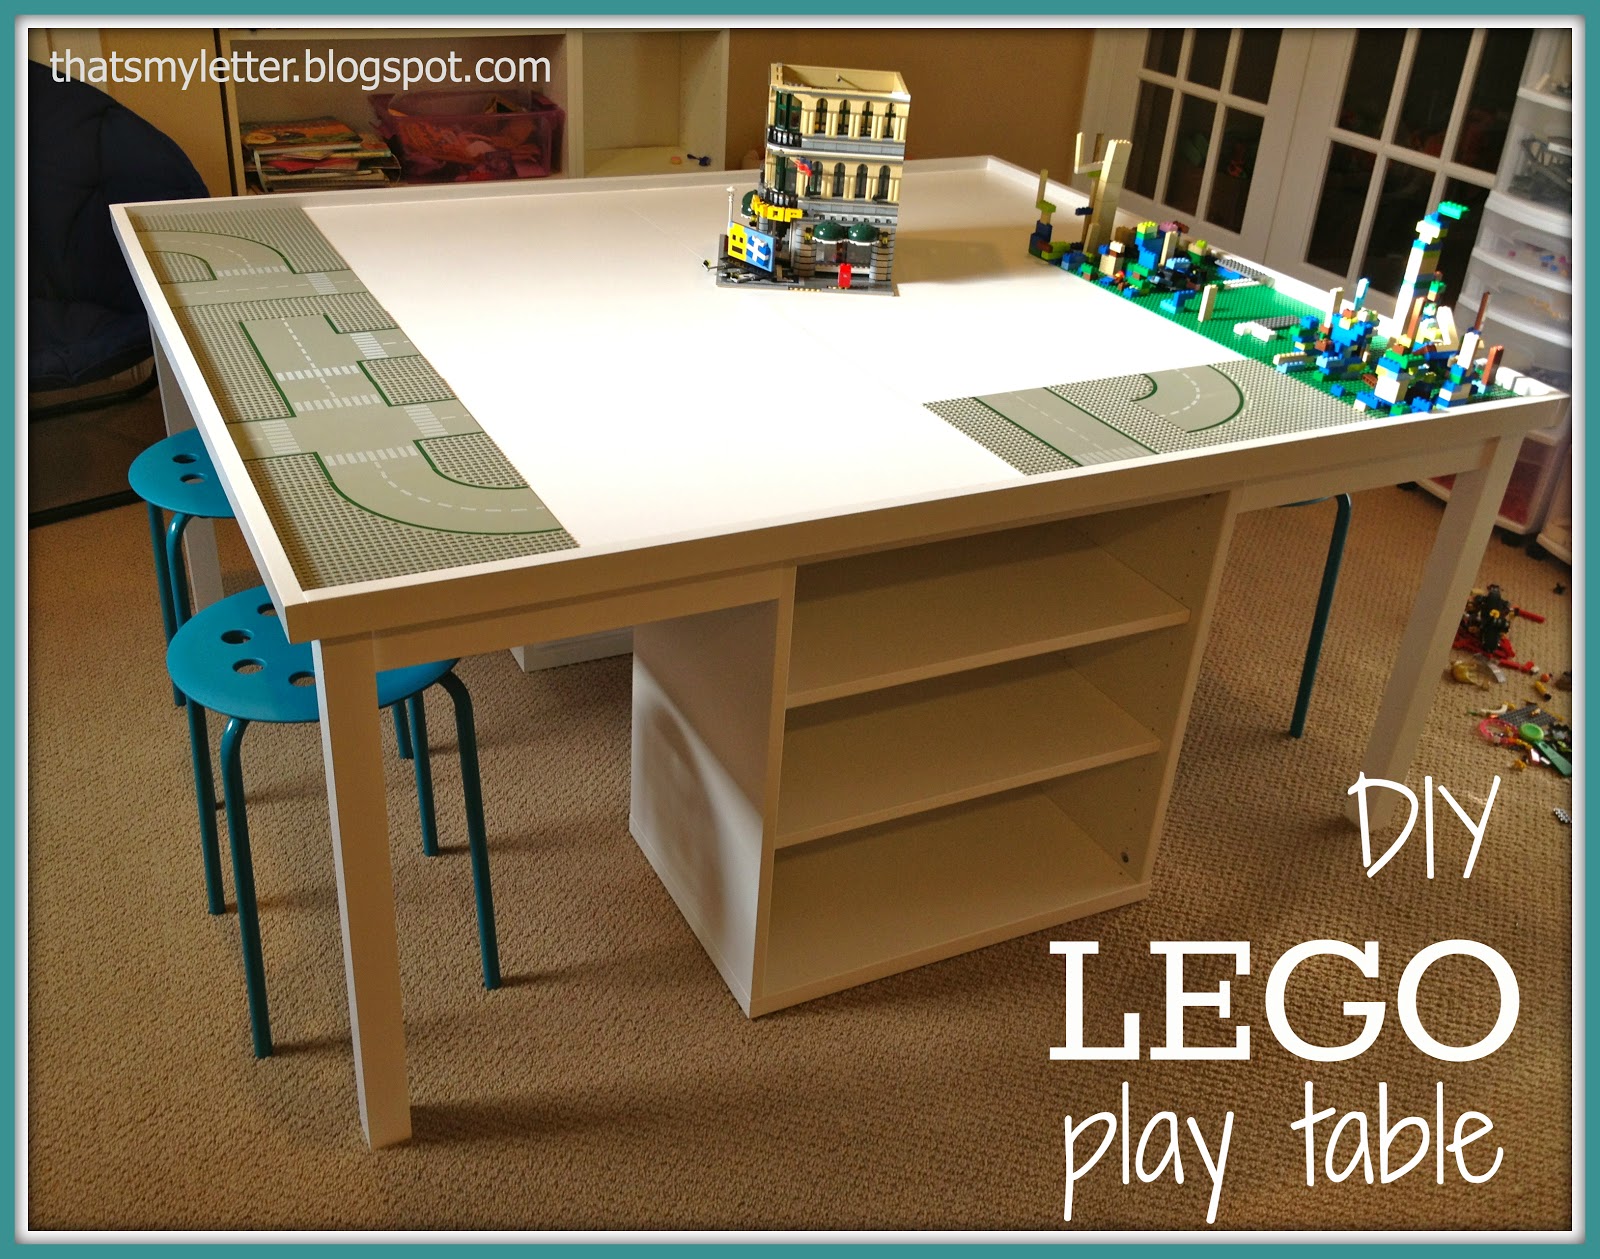 giant lego play table space designed for storage and seating area: